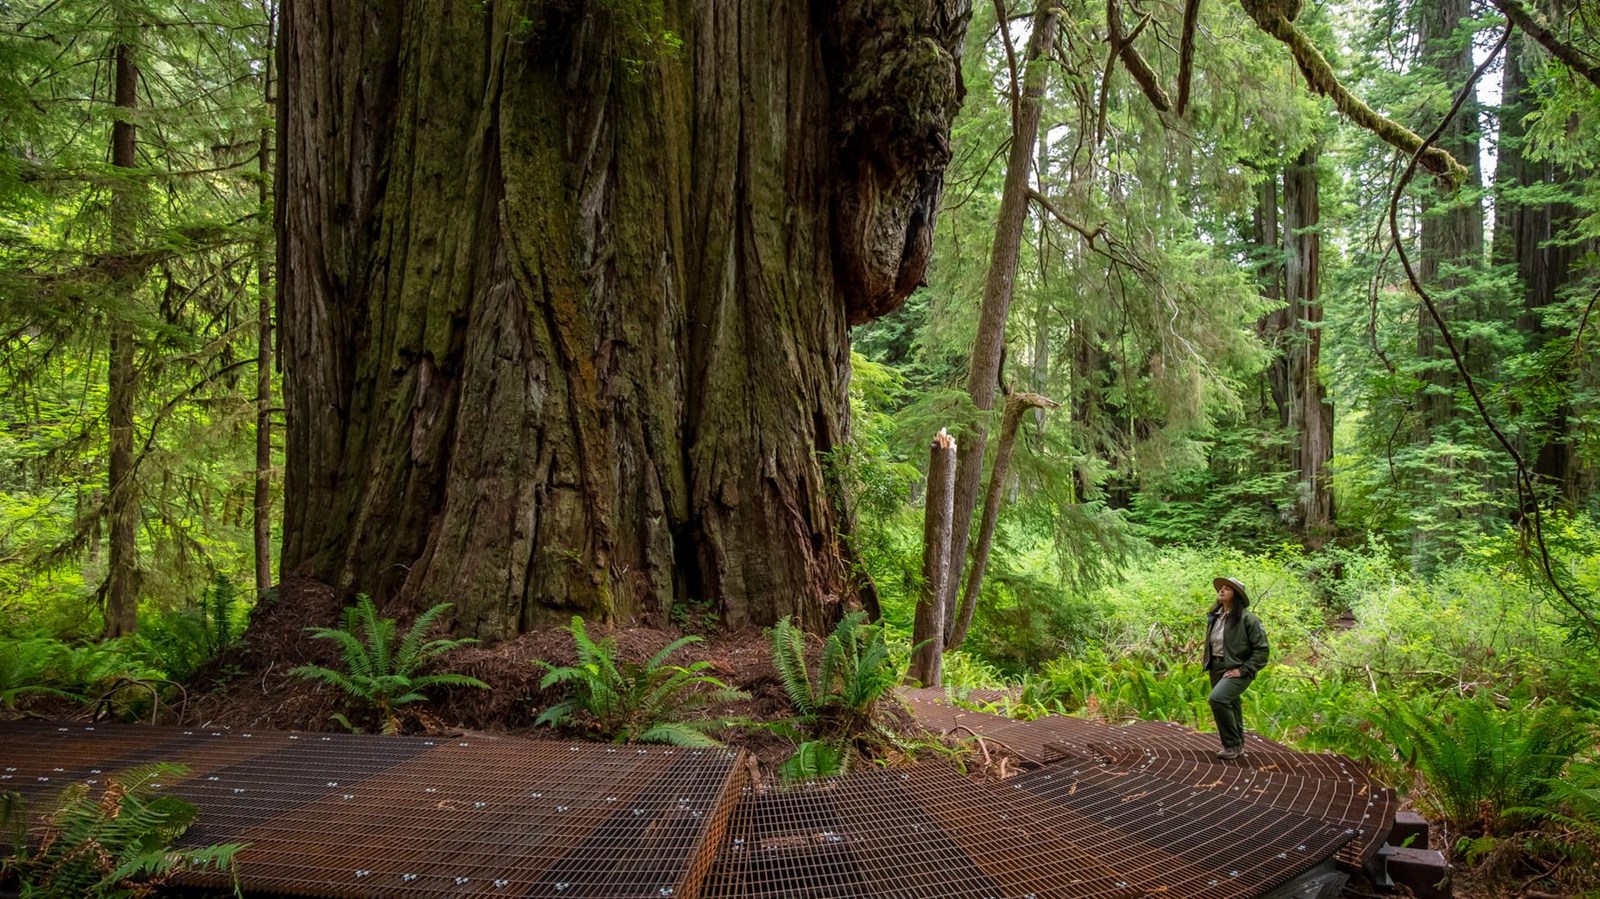 A female park ranger stands on a metal elevated boardwalk next to a large redwood tree.